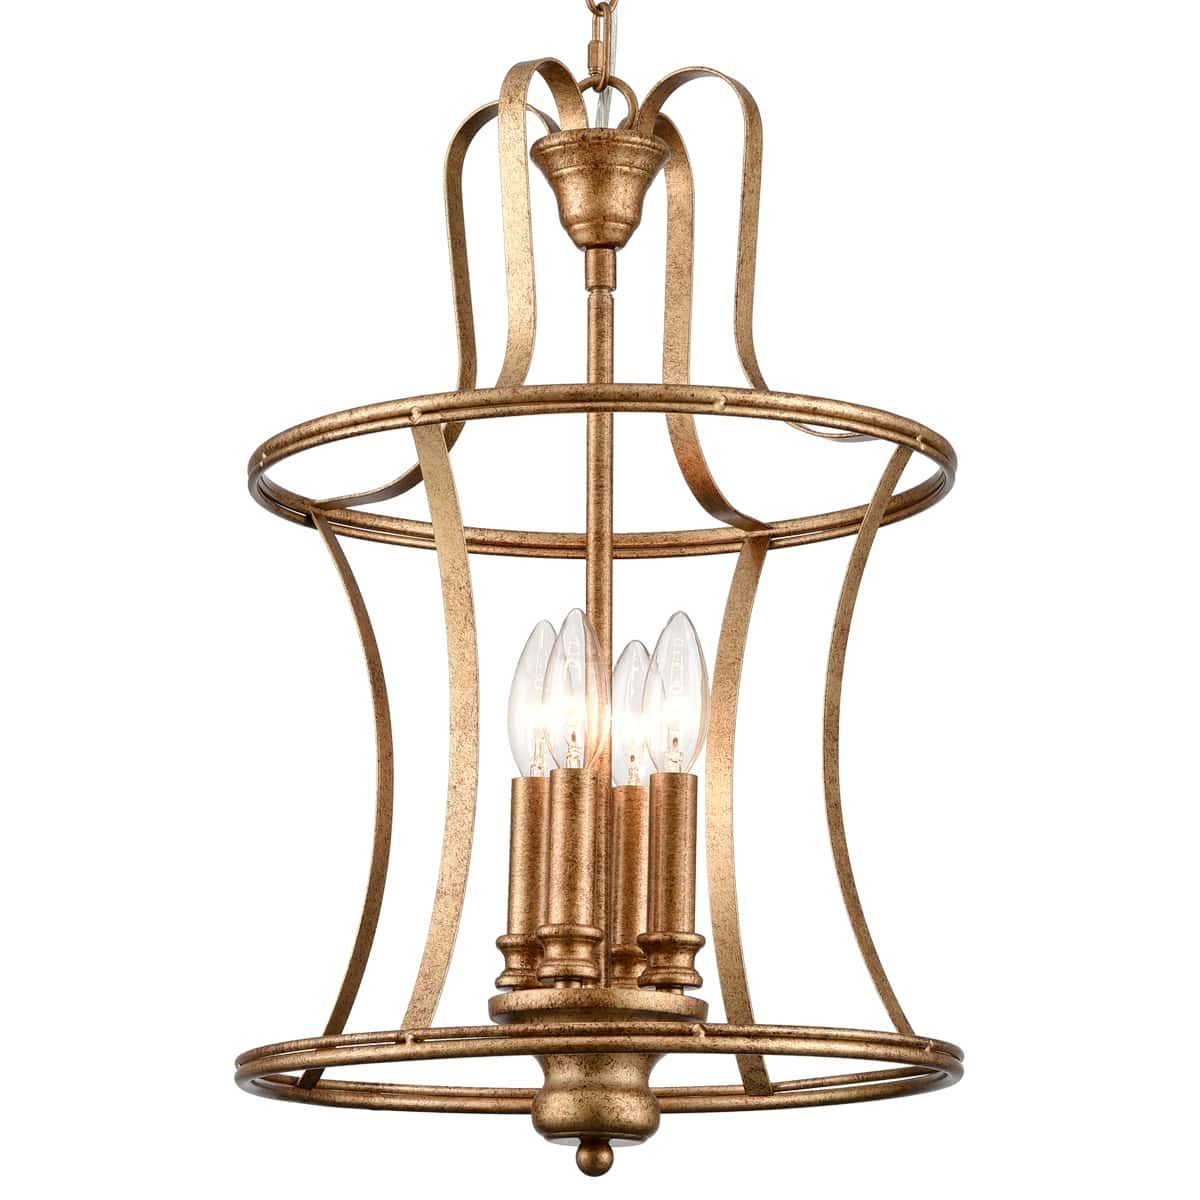 Antique Gild Lantern Chandeliers In Most Up To Date Lantern Chandelier Farmhouse 4 Lights Pendant Light (View 9 of 15)